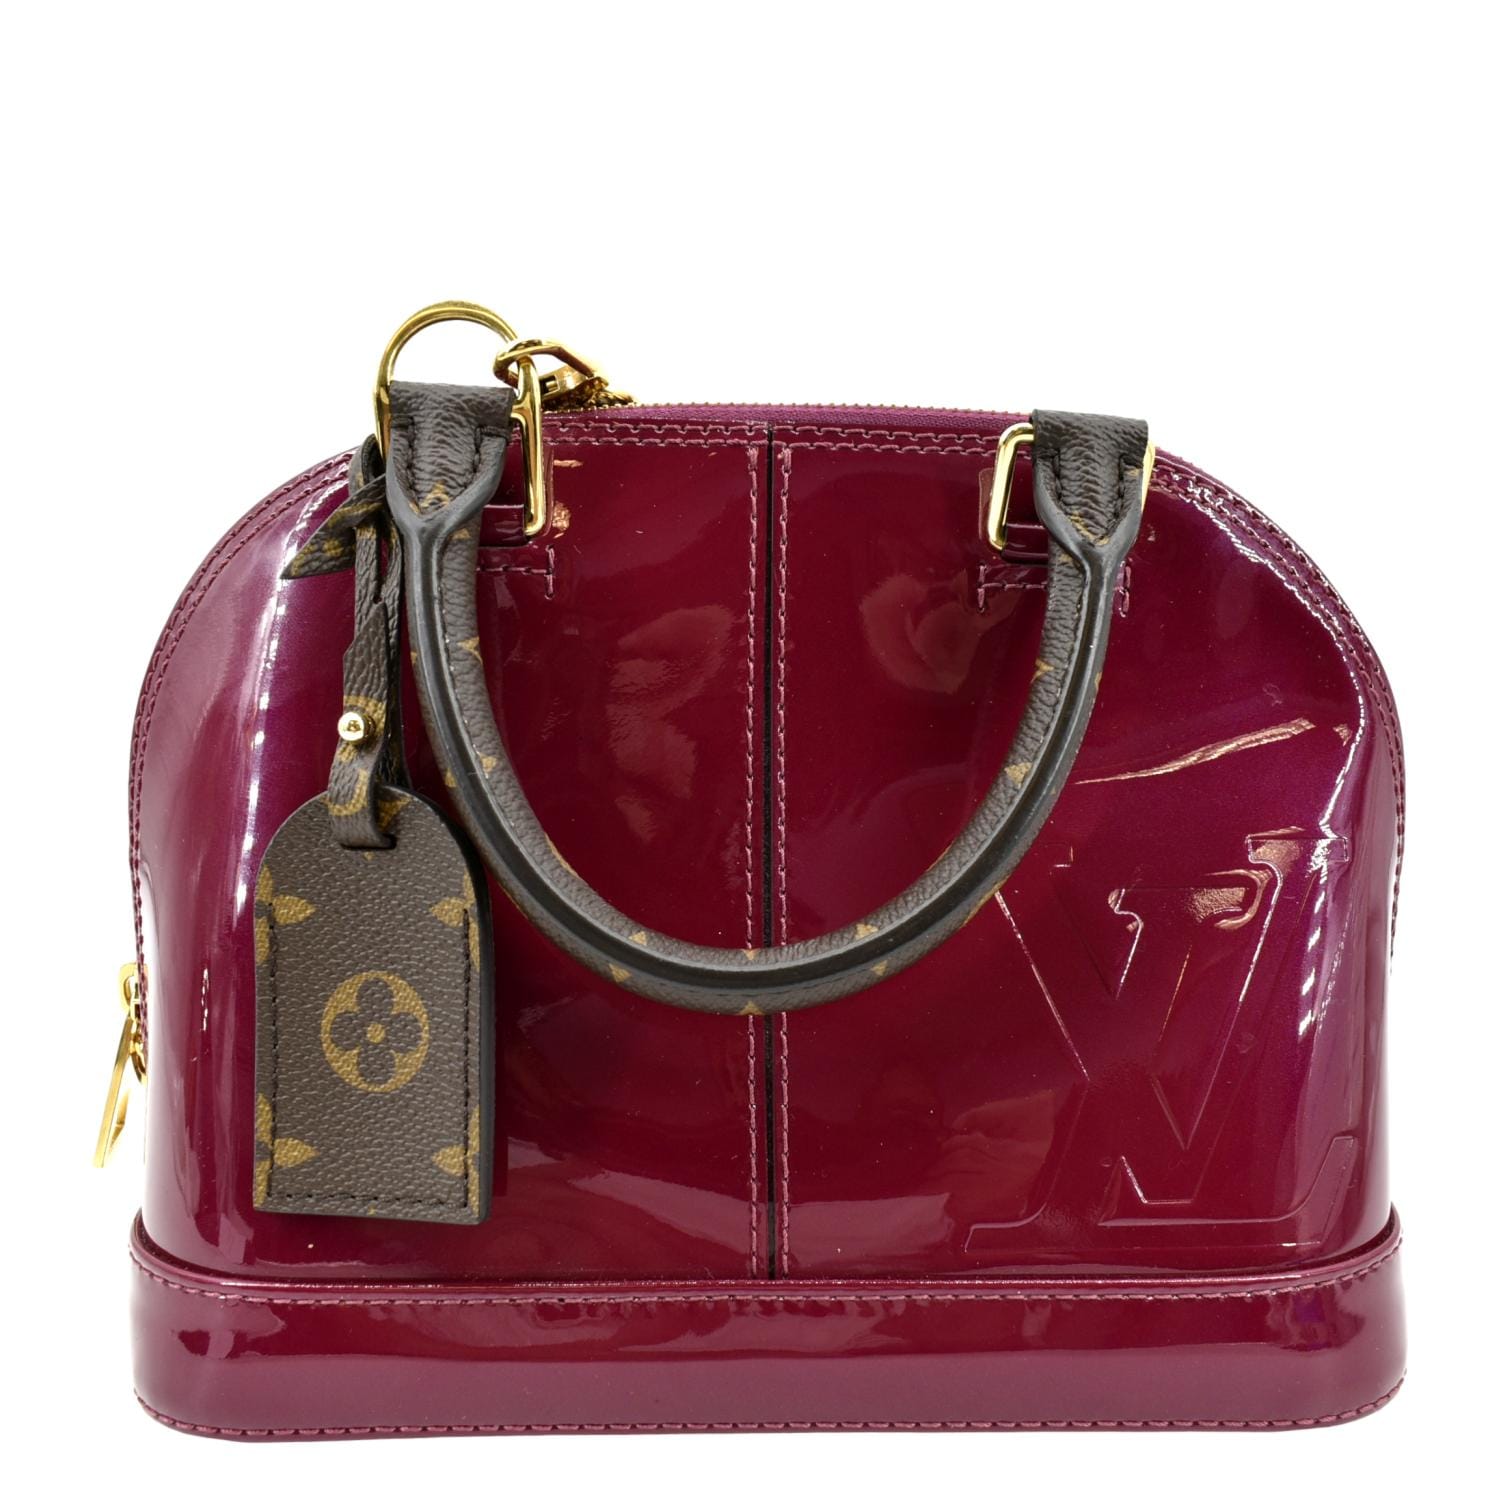 Louis Vuitton alma bb handbag in red,9-inch wide,7.5 inches high,4.3 inches  deep